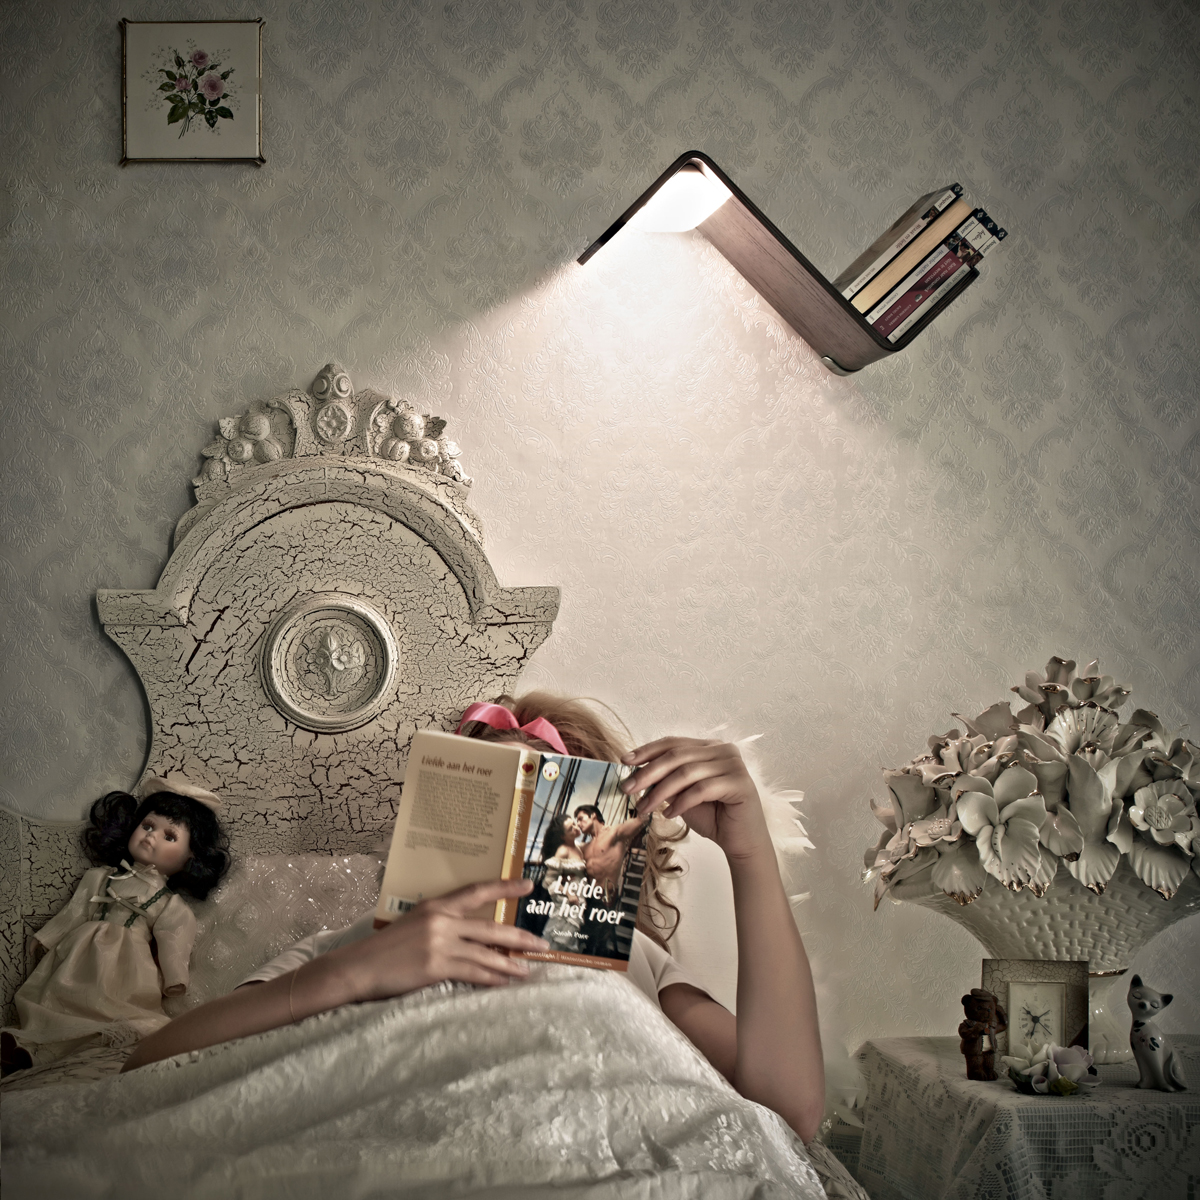 Lili Lite - The Ultimate Reading Lamp